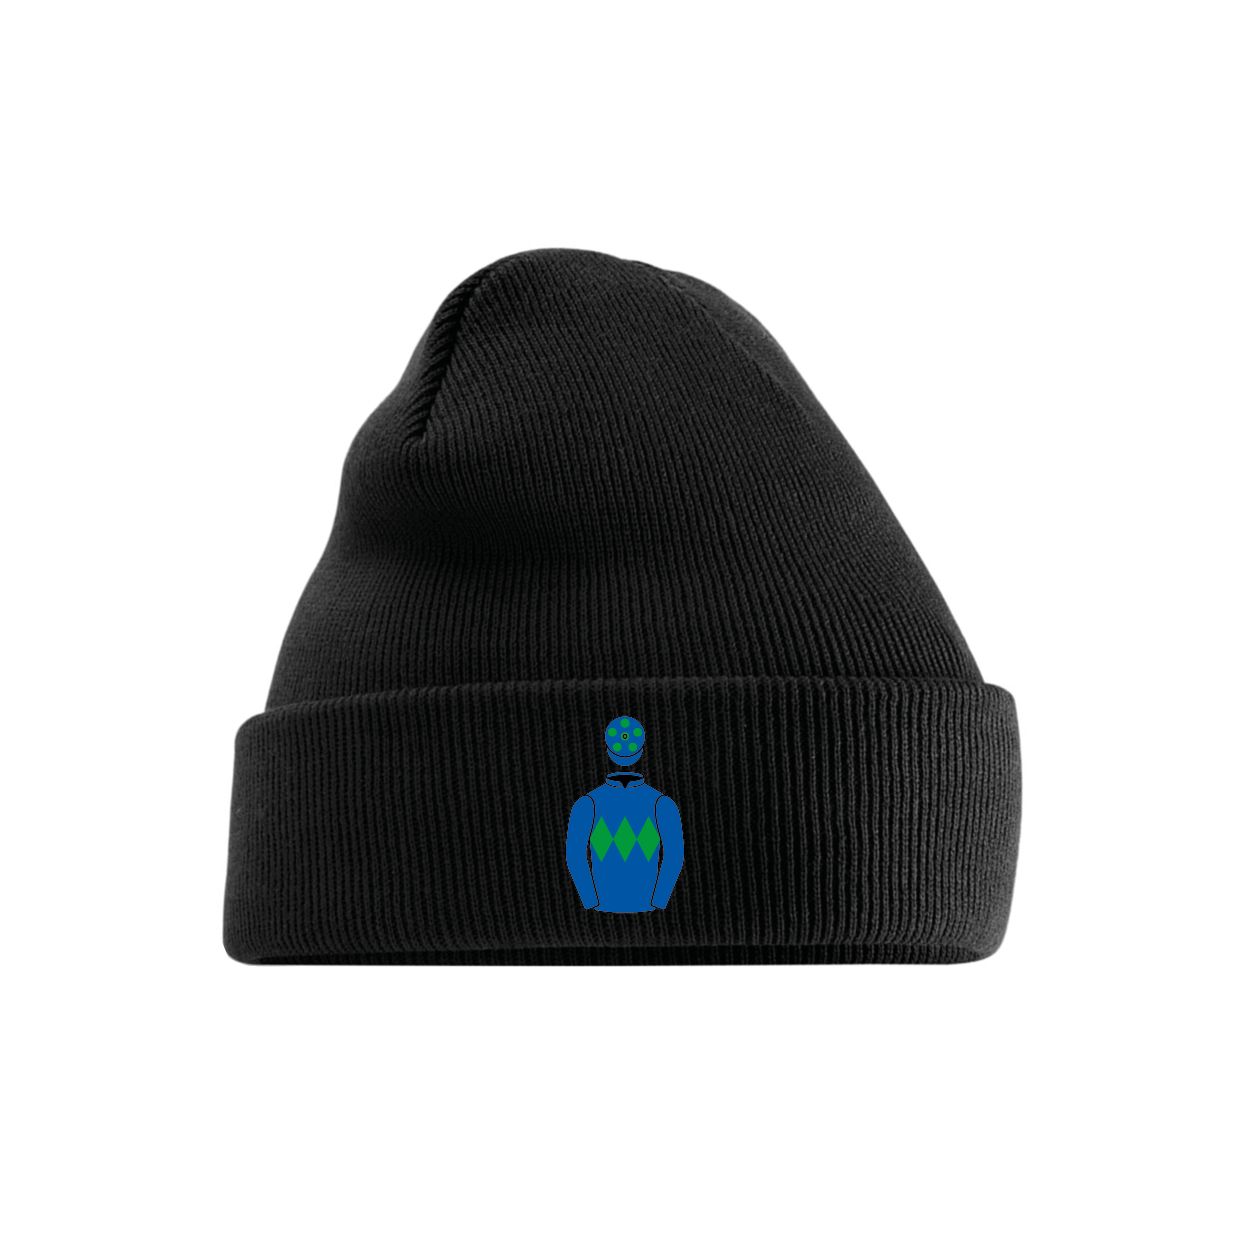 George Creighton Embroidered Cuffed Beanie - Hacked Up